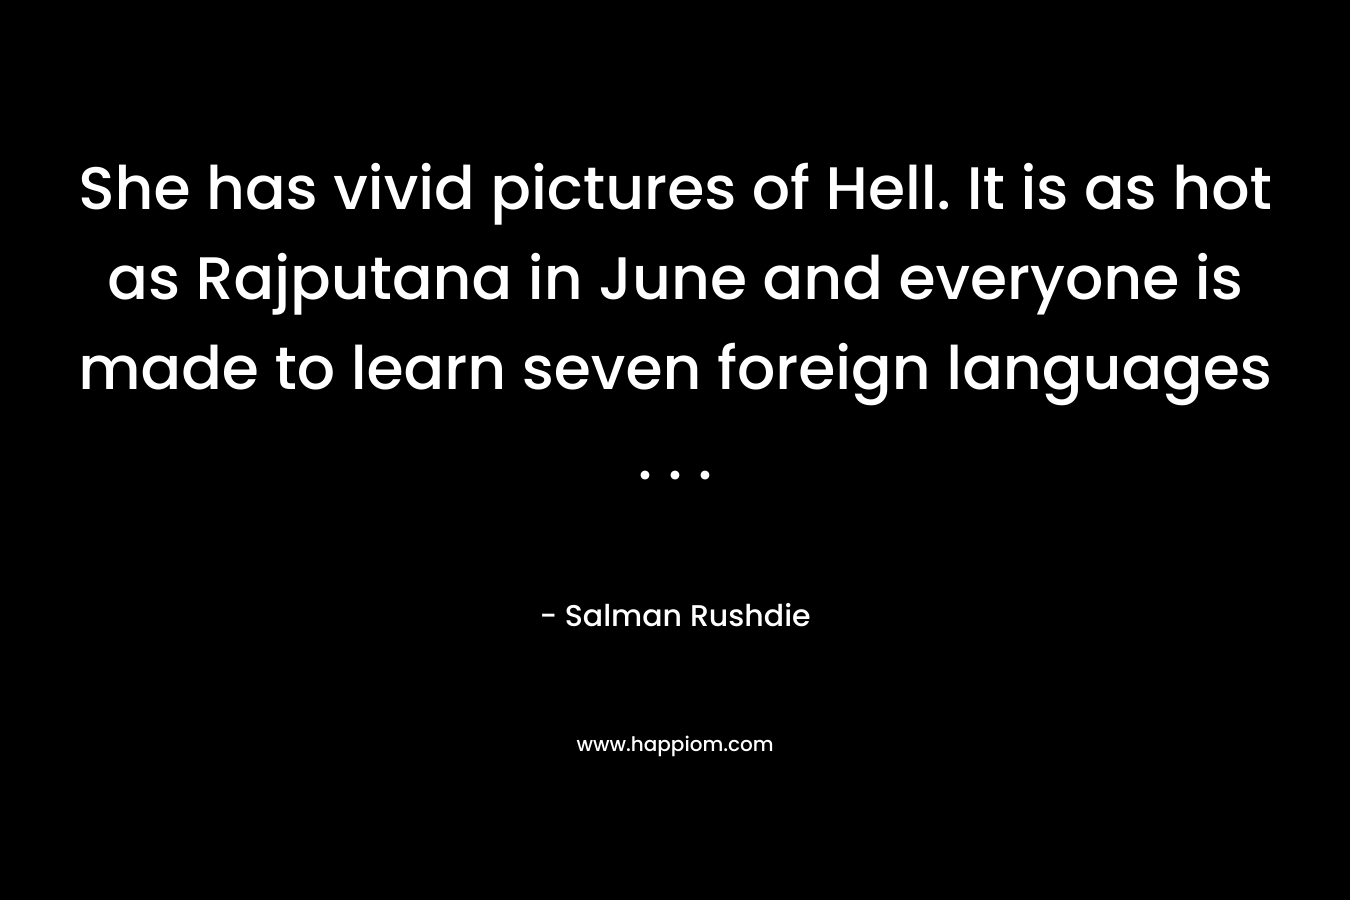 She has vivid pictures of Hell. It is as hot as Rajputana in June and everyone is made to learn seven foreign languages . . .